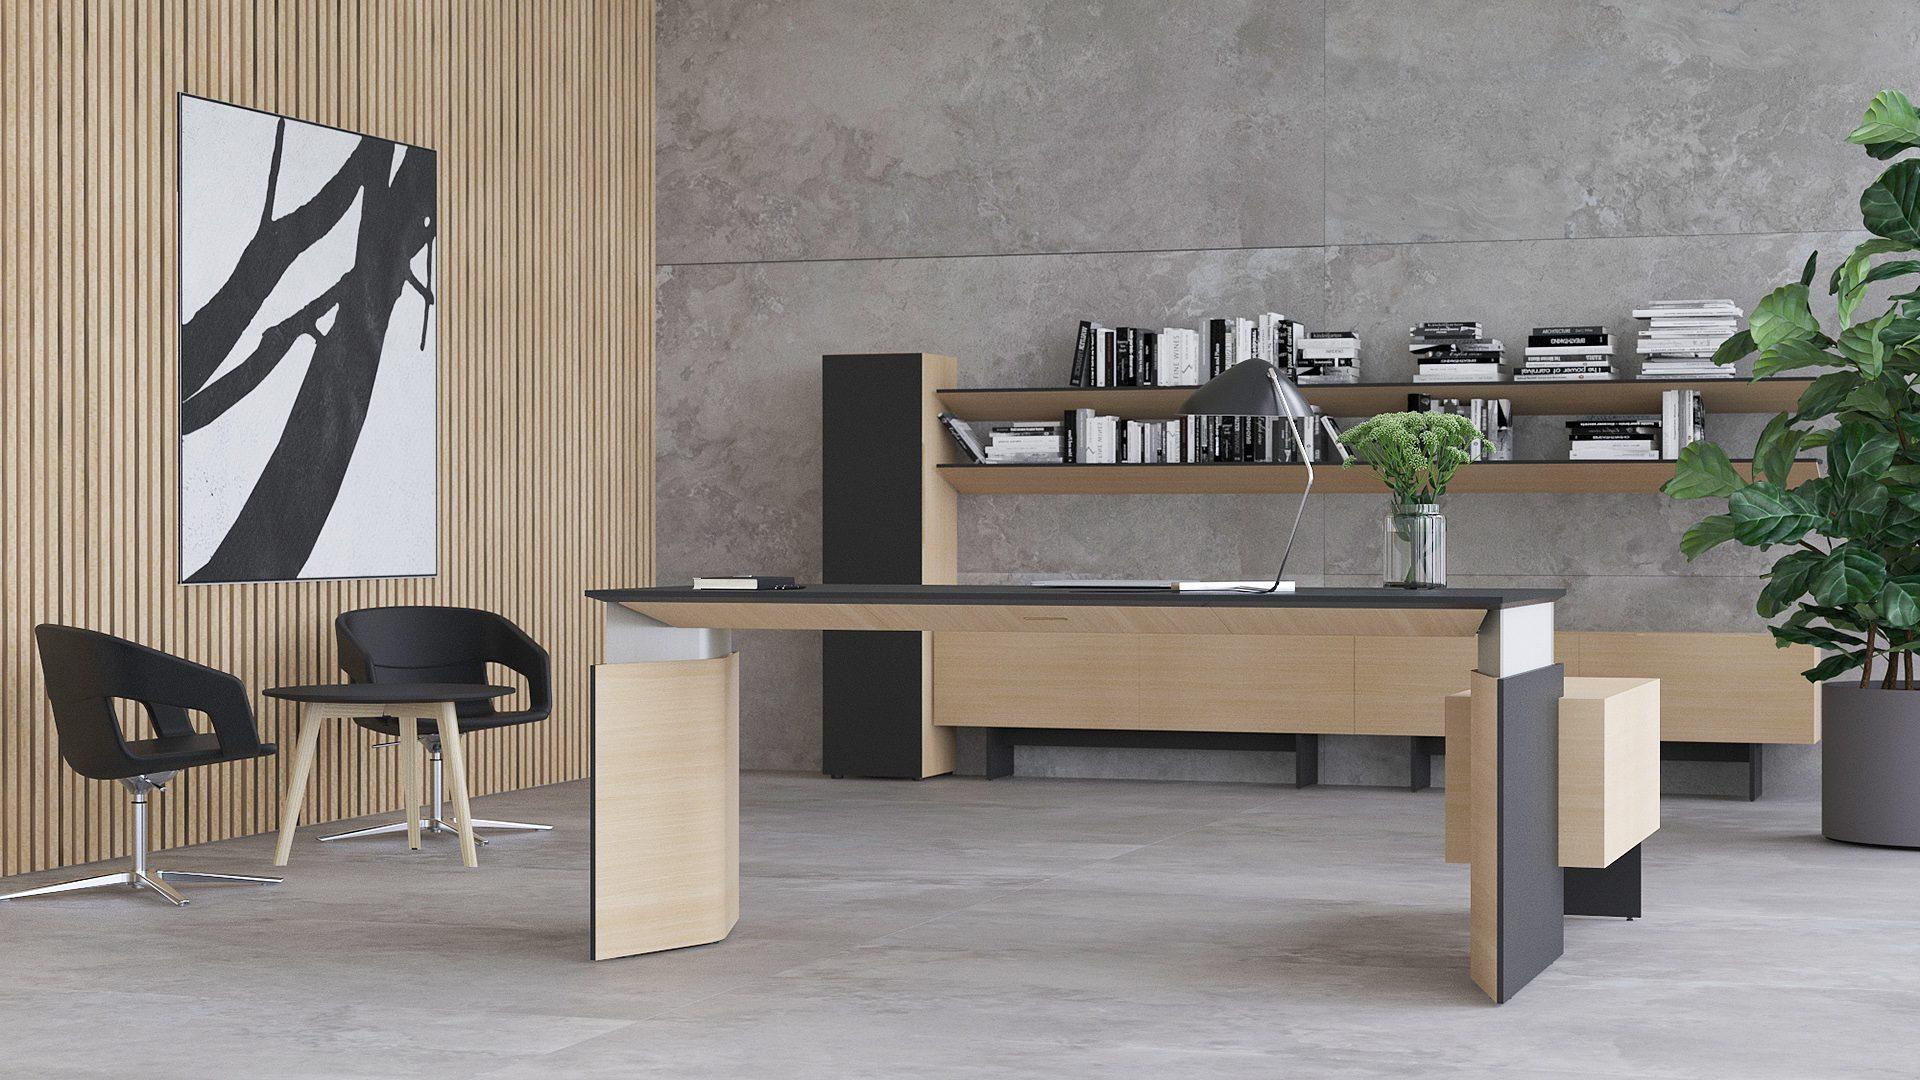 Move &amp; Lead is a minimalist, elegant and functional executive office furniture system